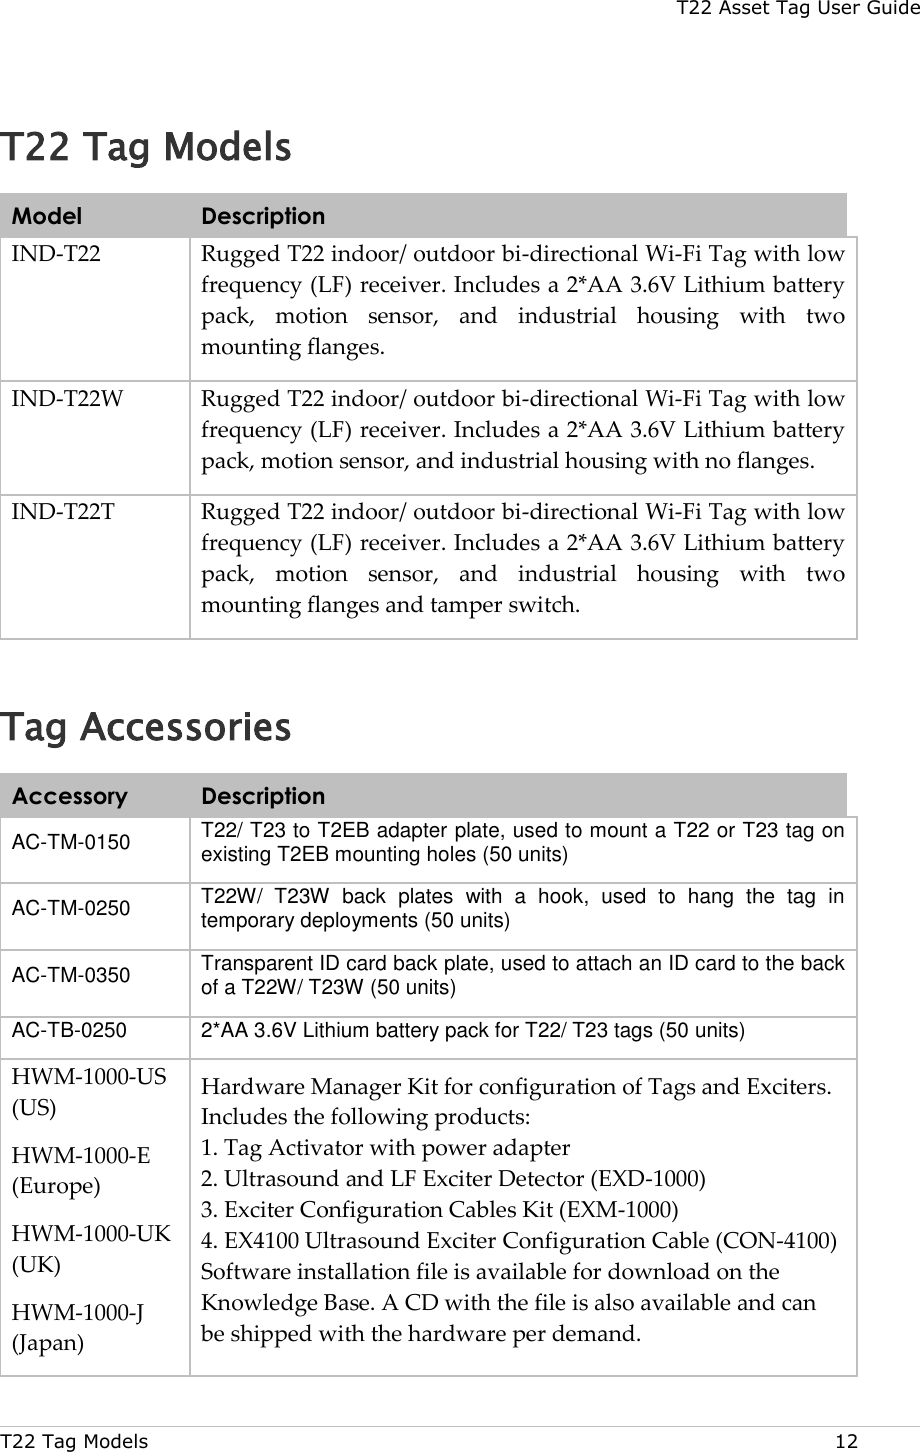 T22 Asset Tag User Guide T22 Tag Models  12 T22 Tag Models Model Description IND-T22 Rugged T22 indoor/ outdoor bi-directional Wi-Fi Tag with low frequency (LF) receiver. Includes a 2*AA 3.6V Lithium battery pack,  motion  sensor,  and  industrial  housing  with  two mounting flanges. IND-T22W Rugged T22 indoor/ outdoor bi-directional Wi-Fi Tag with low frequency (LF) receiver. Includes a 2*AA 3.6V Lithium battery pack, motion sensor, and industrial housing with no flanges. IND-T22T Rugged T22 indoor/ outdoor bi-directional Wi-Fi Tag with low frequency (LF) receiver. Includes a 2*AA 3.6V Lithium battery pack,  motion  sensor,  and  industrial  housing  with  two mounting flanges and tamper switch. Tag Accessories Accessory Description AC-TM-0150 T22/ T23 to T2EB adapter plate, used to mount a T22 or T23 tag on existing T2EB mounting holes (50 units) AC-TM-0250 T22W/  T23W  back  plates  with  a  hook,  used  to  hang  the  tag  in temporary deployments (50 units) AC-TM-0350 Transparent ID card back plate, used to attach an ID card to the back of a T22W/ T23W (50 units) AC-TB-0250 2*AA 3.6V Lithium battery pack for T22/ T23 tags (50 units) HWM-1000-US (US) HWM-1000-E (Europe) HWM-1000-UK (UK) HWM-1000-J (Japan) Hardware Manager Kit for configuration of Tags and Exciters. Includes the following products:  1. Tag Activator with power adapter  2. Ultrasound and LF Exciter Detector (EXD-1000)  3. Exciter Configuration Cables Kit (EXM-1000)  4. EX4100 Ultrasound Exciter Configuration Cable (CON-4100)  Software installation file is available for download on the Knowledge Base. A CD with the file is also available and can be shipped with the hardware per demand. 